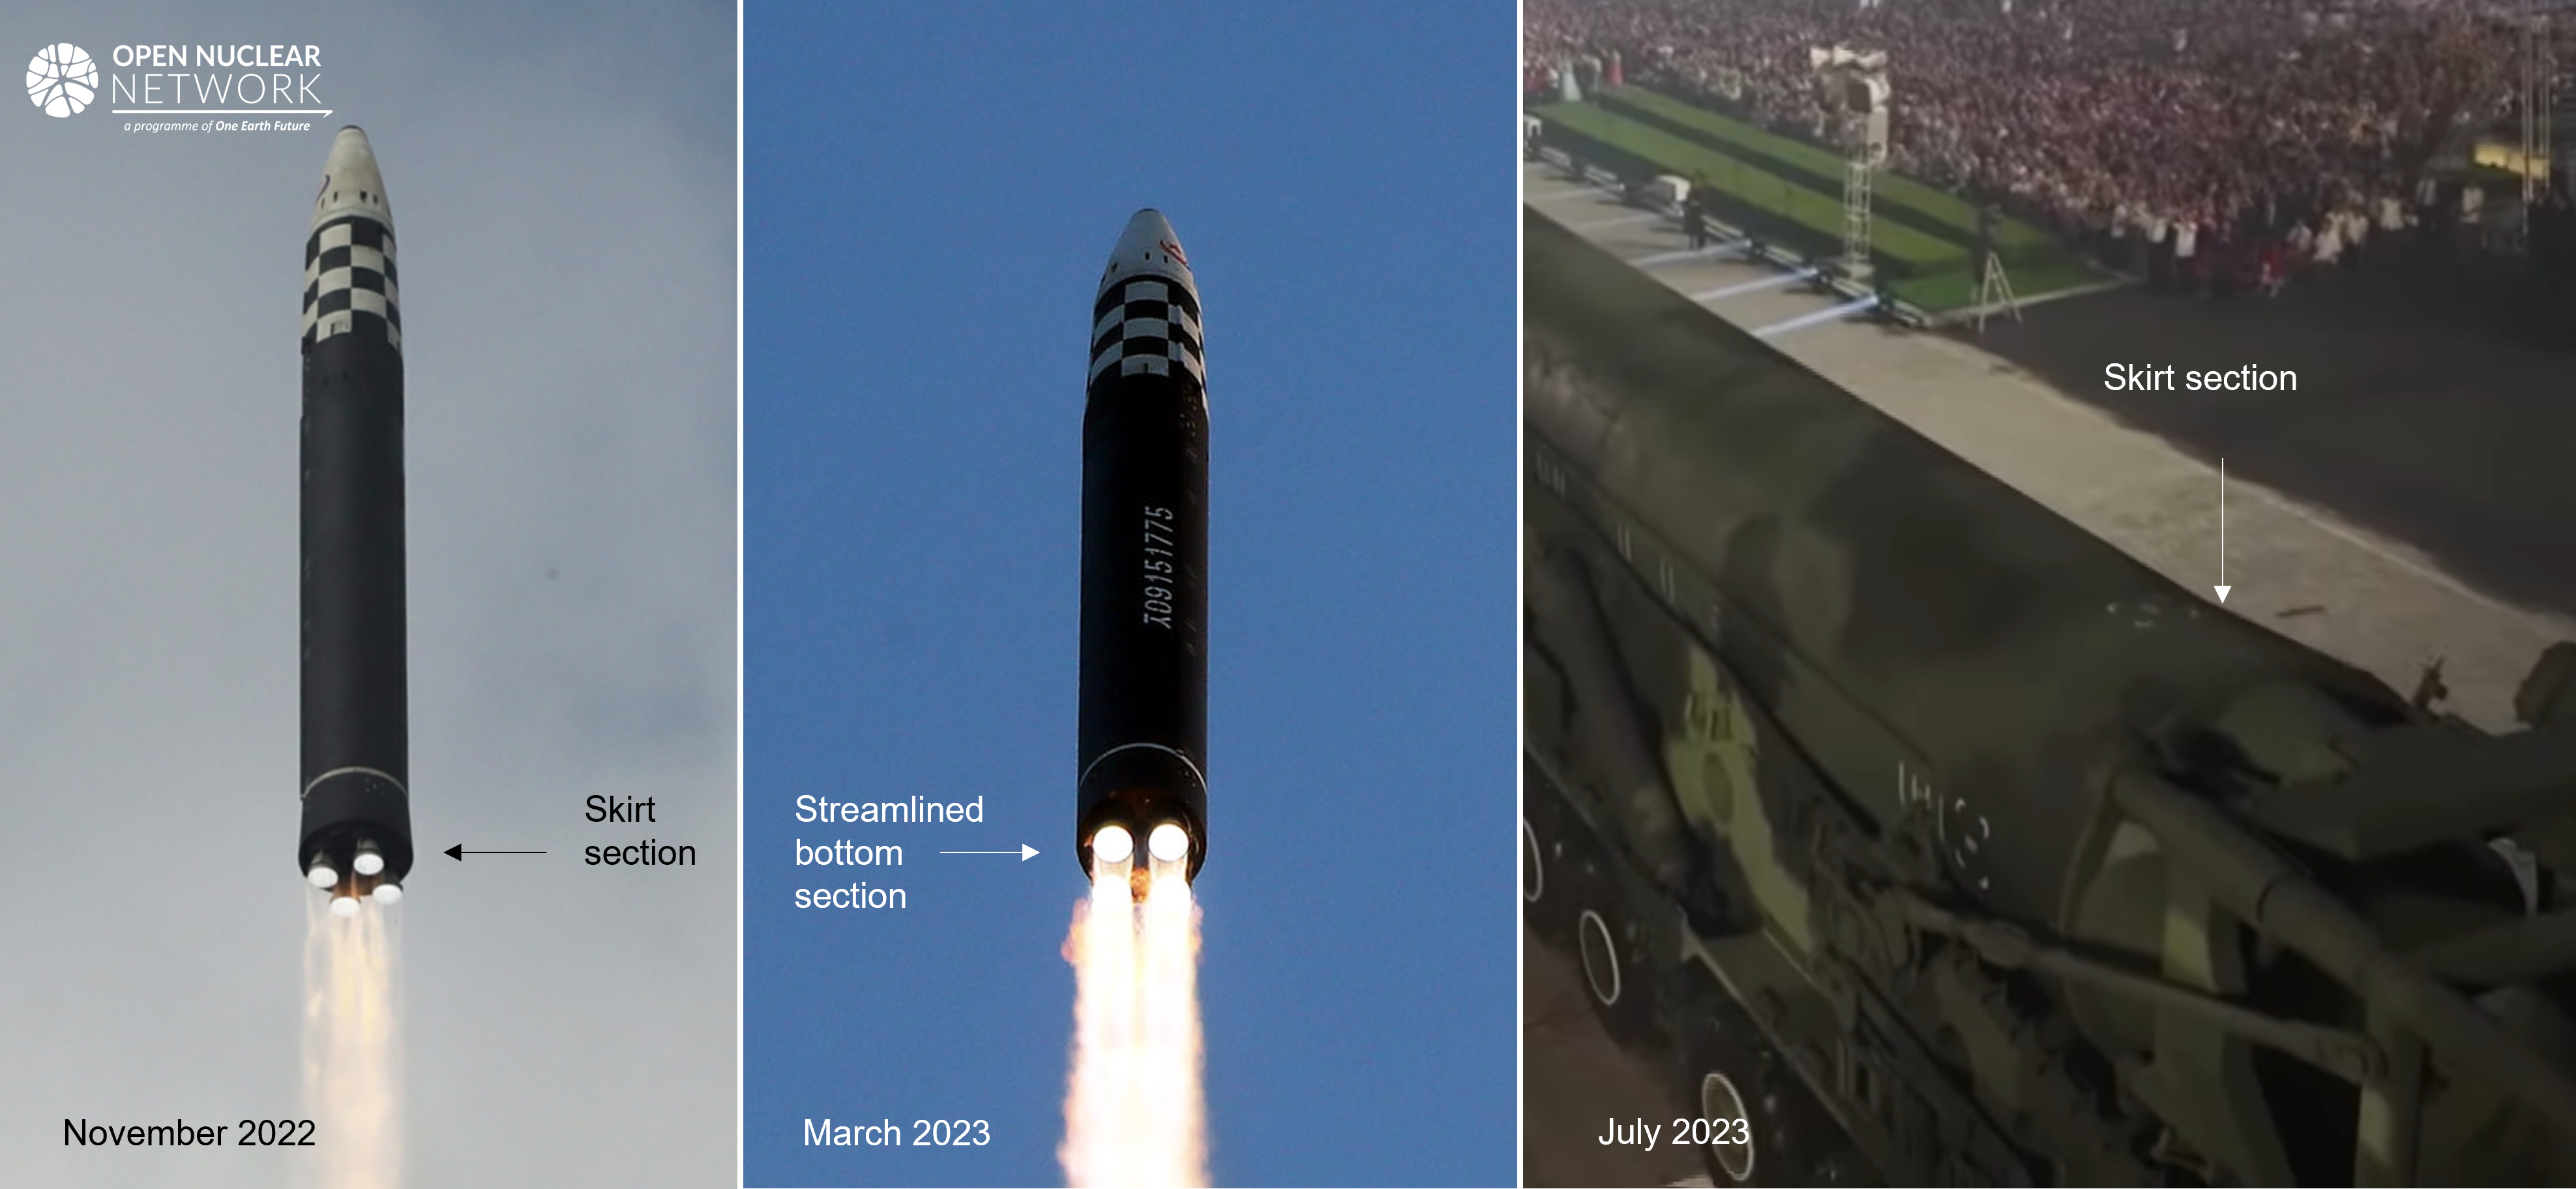 Figure 4. Minor adjustment between Hwasong-17 launched in November 2022 and March 2023 (left and middle). The Hwaosng-17’s skirt section seen during the 27 July 2023 parade (right). Images: KCNA